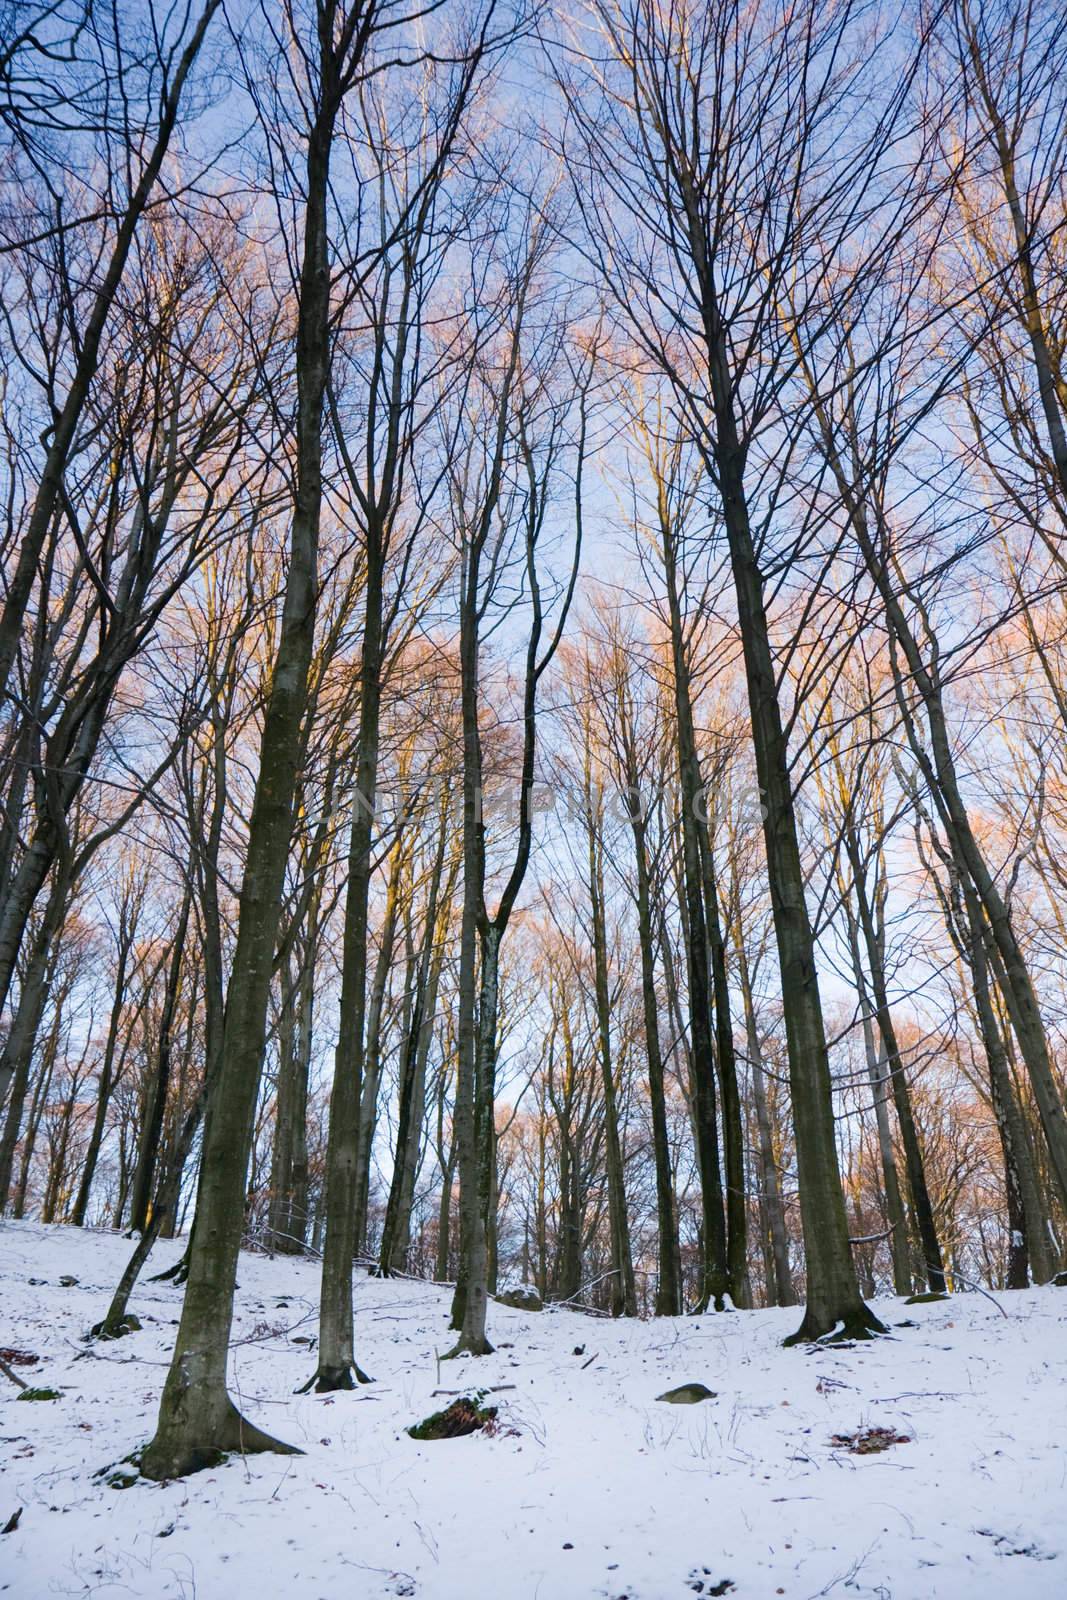 View of a forest in winter (Sweden).